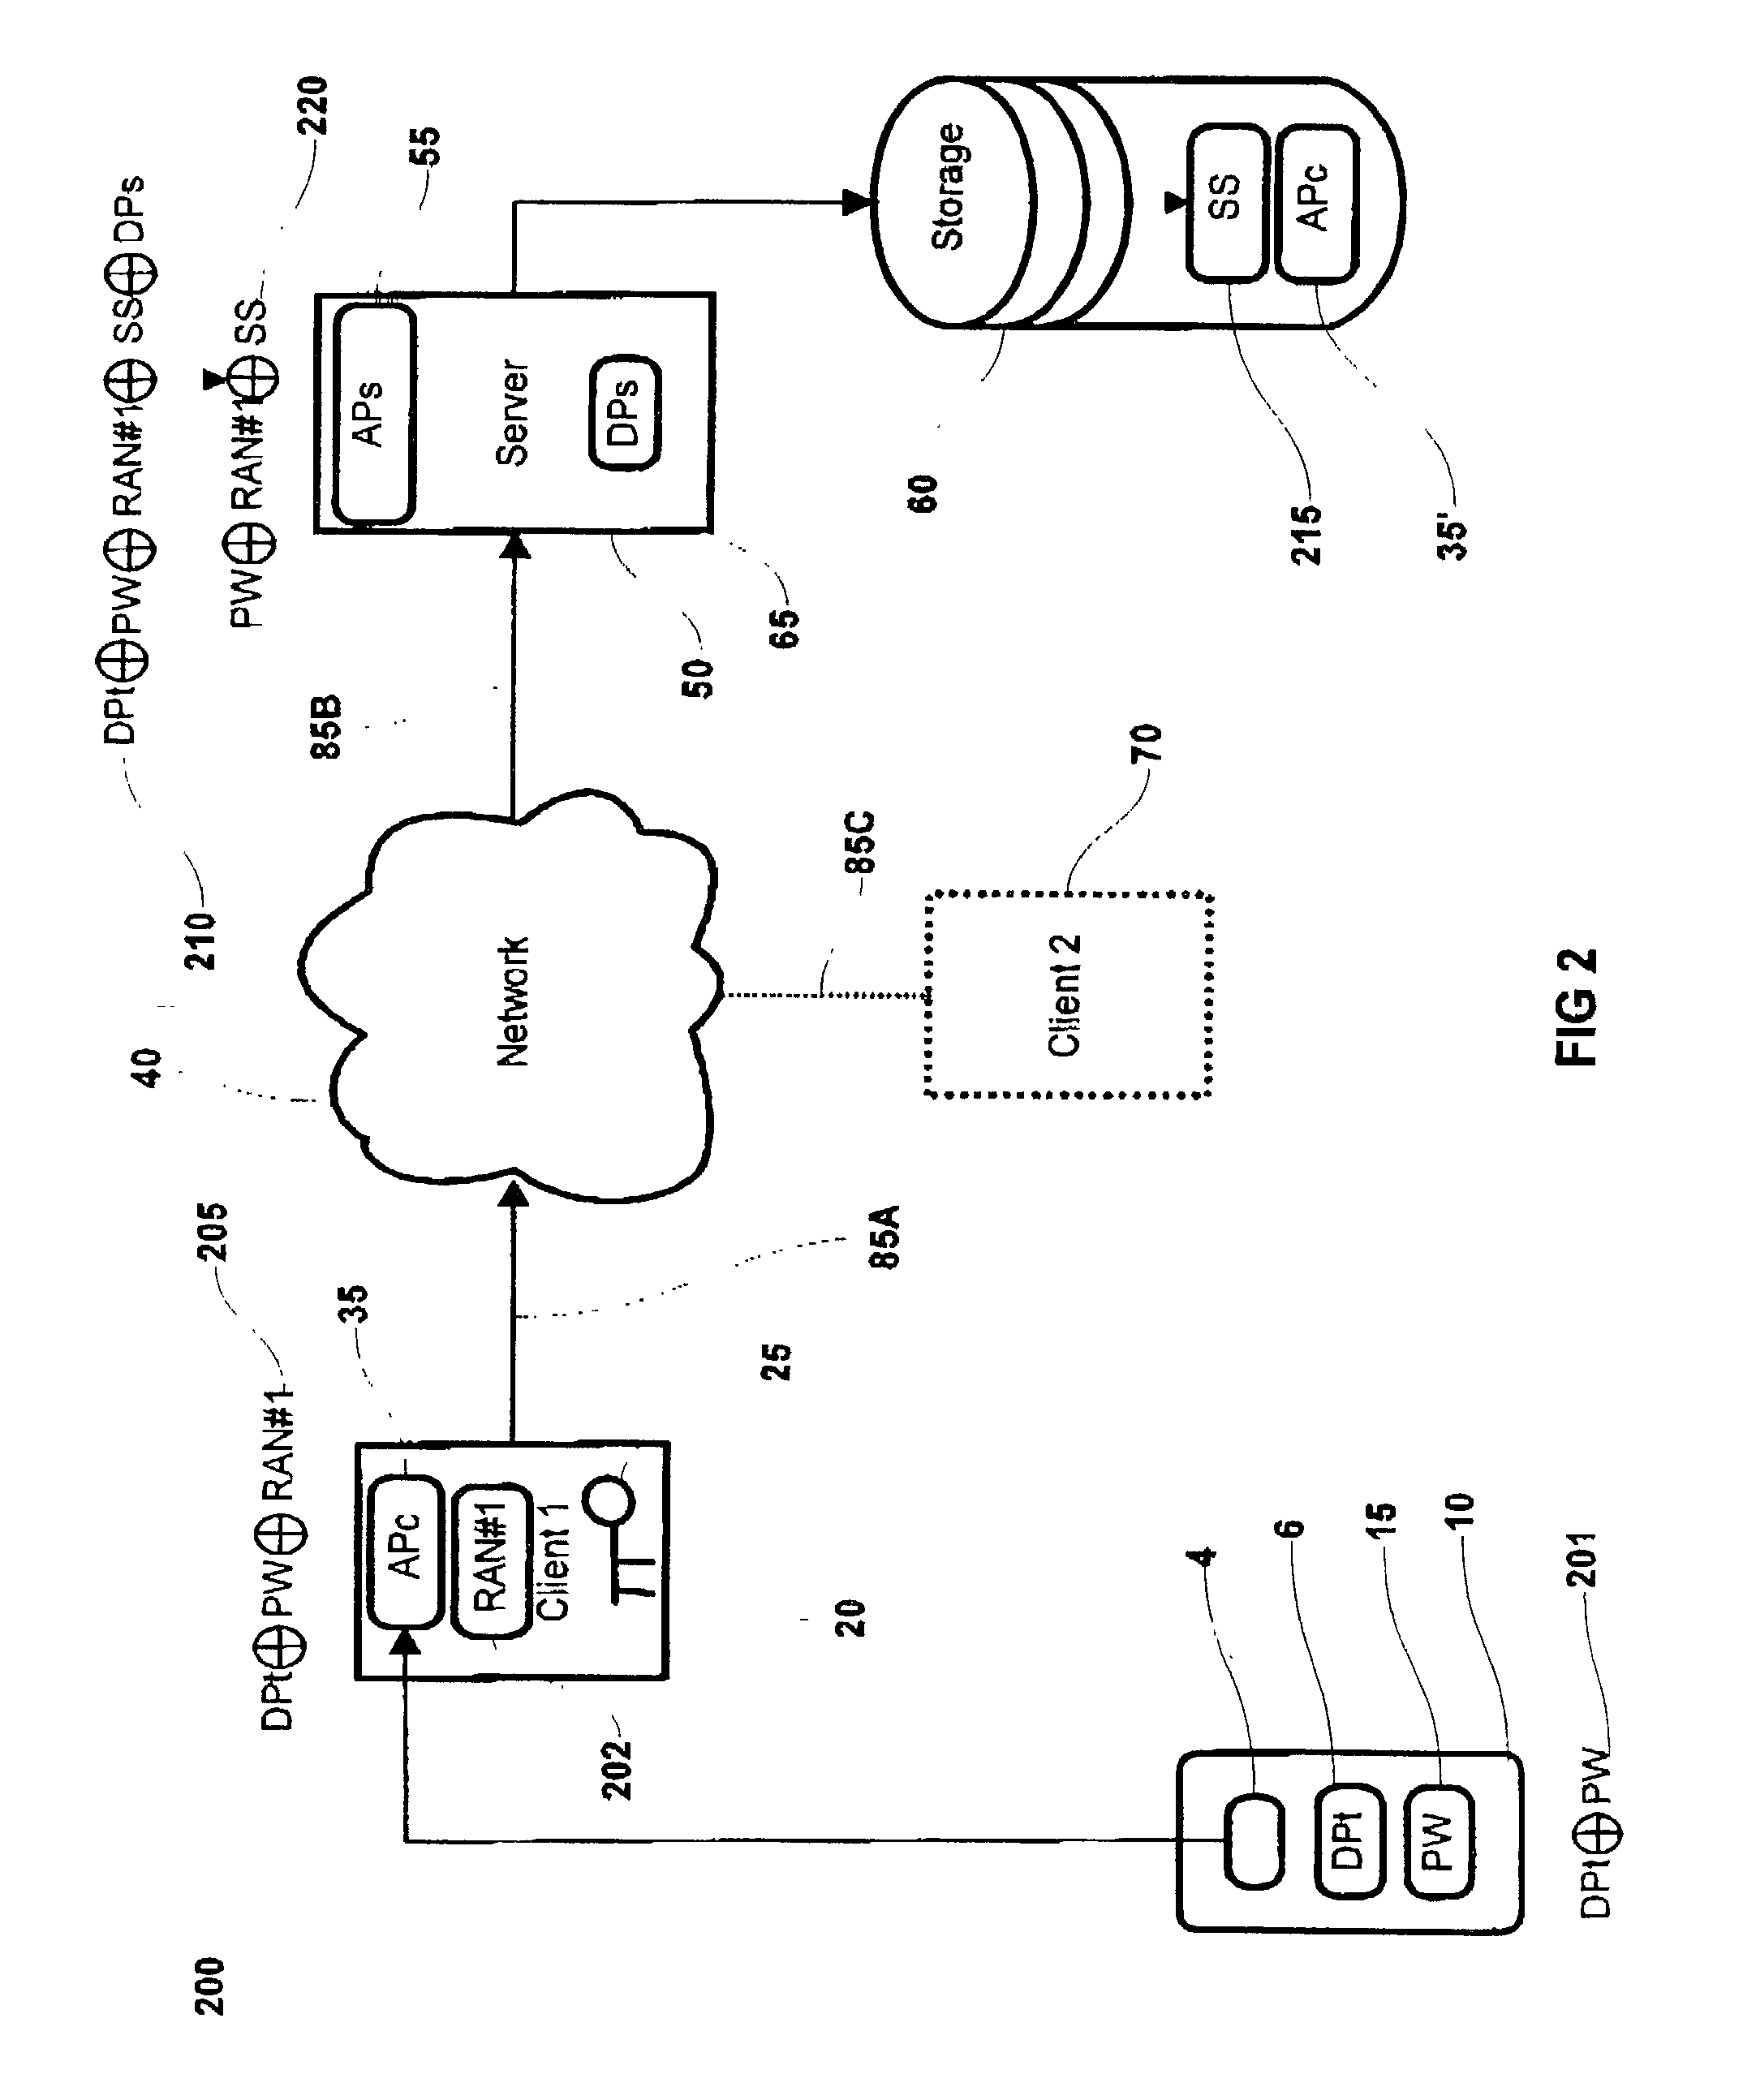 System and method for storage and retrieval of a cryptographic secret from a plurality of network enabled clients